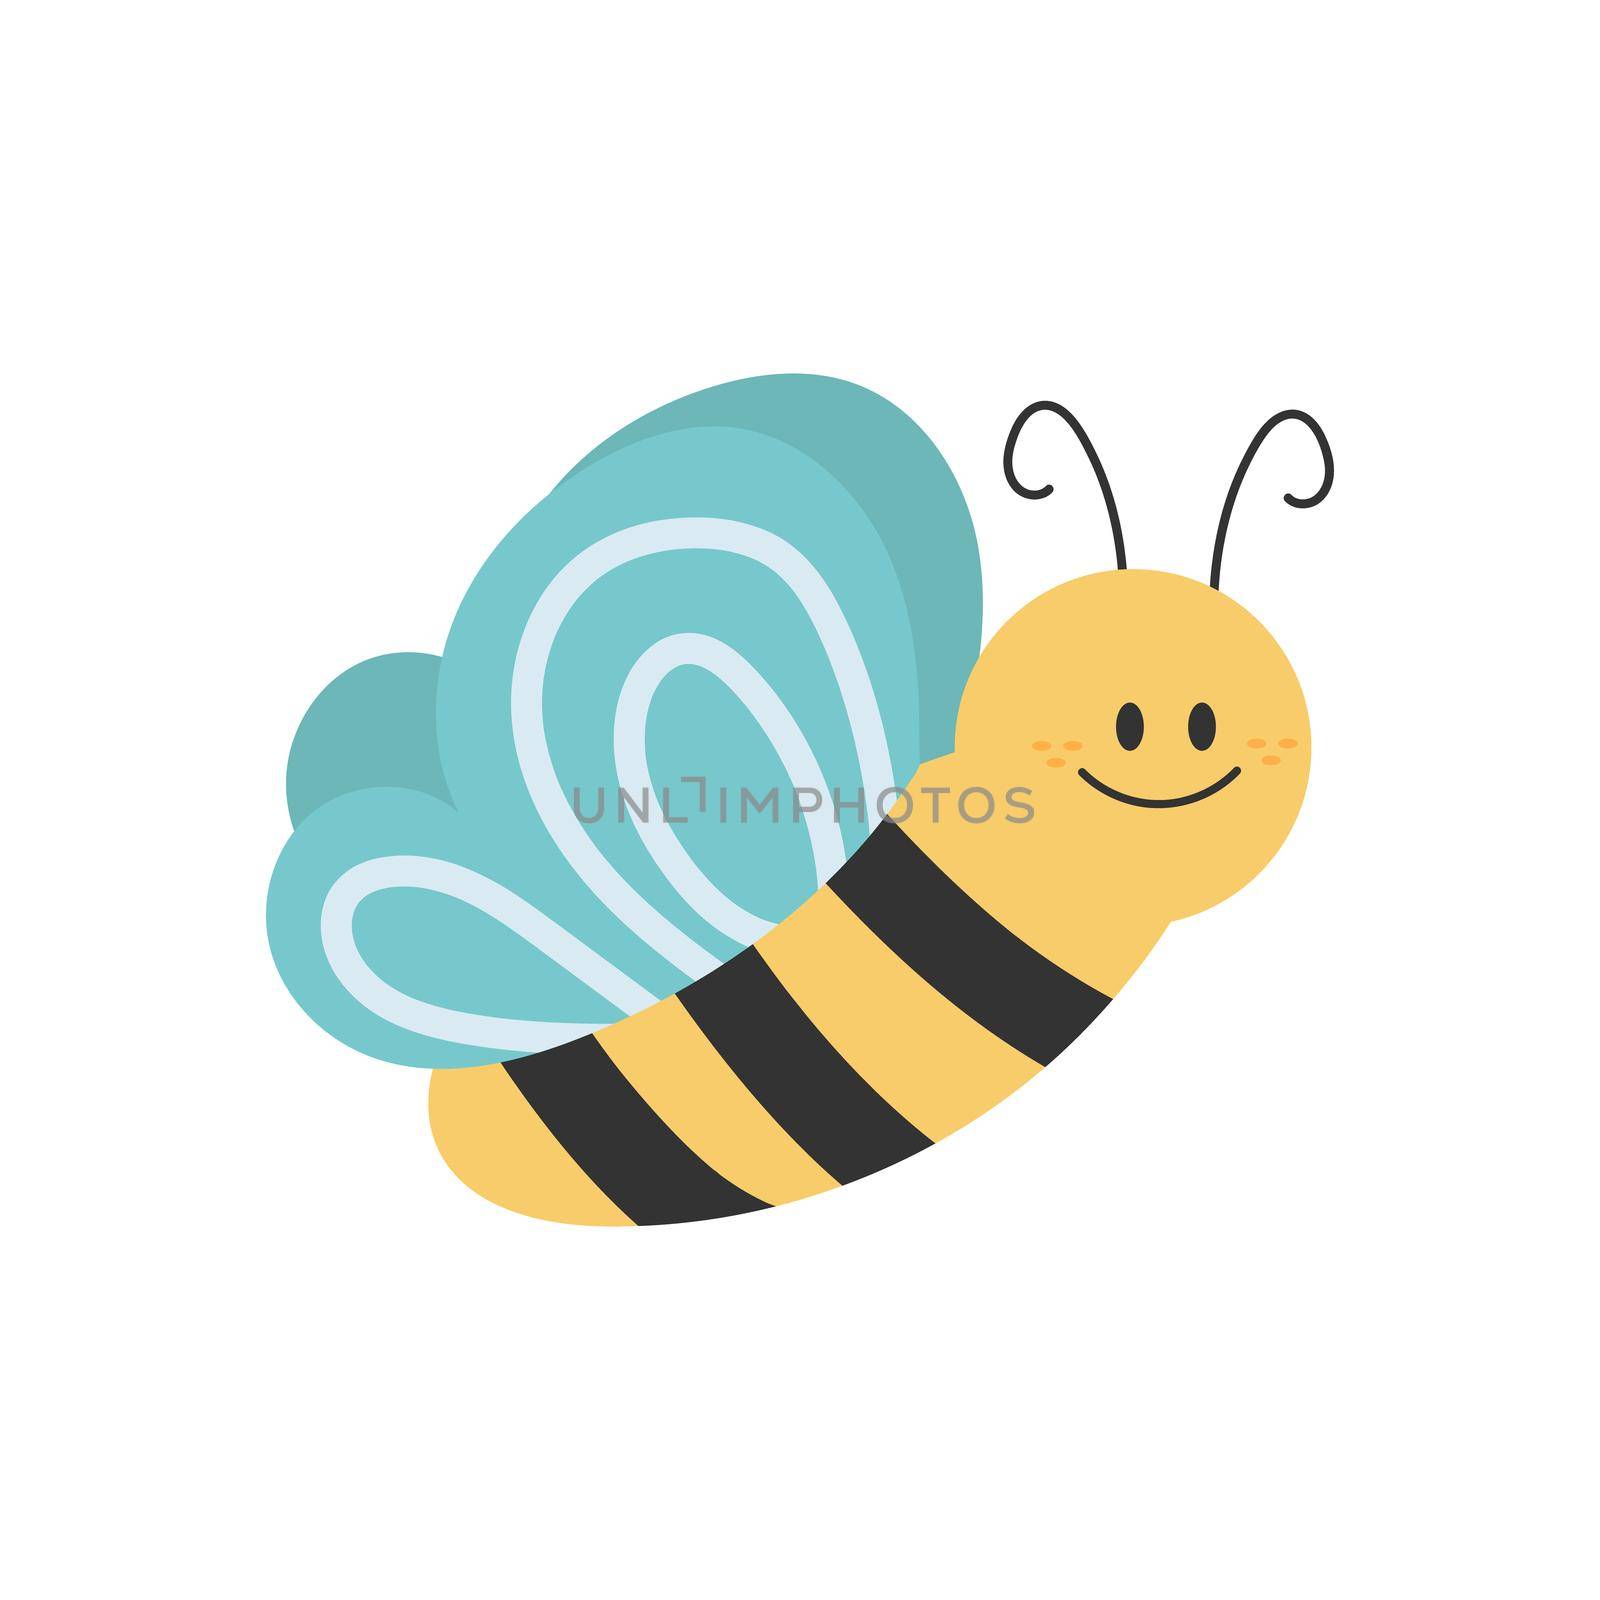 Lovely simple design of a cartoon yellow and black bee on a white background. Hand drawn style